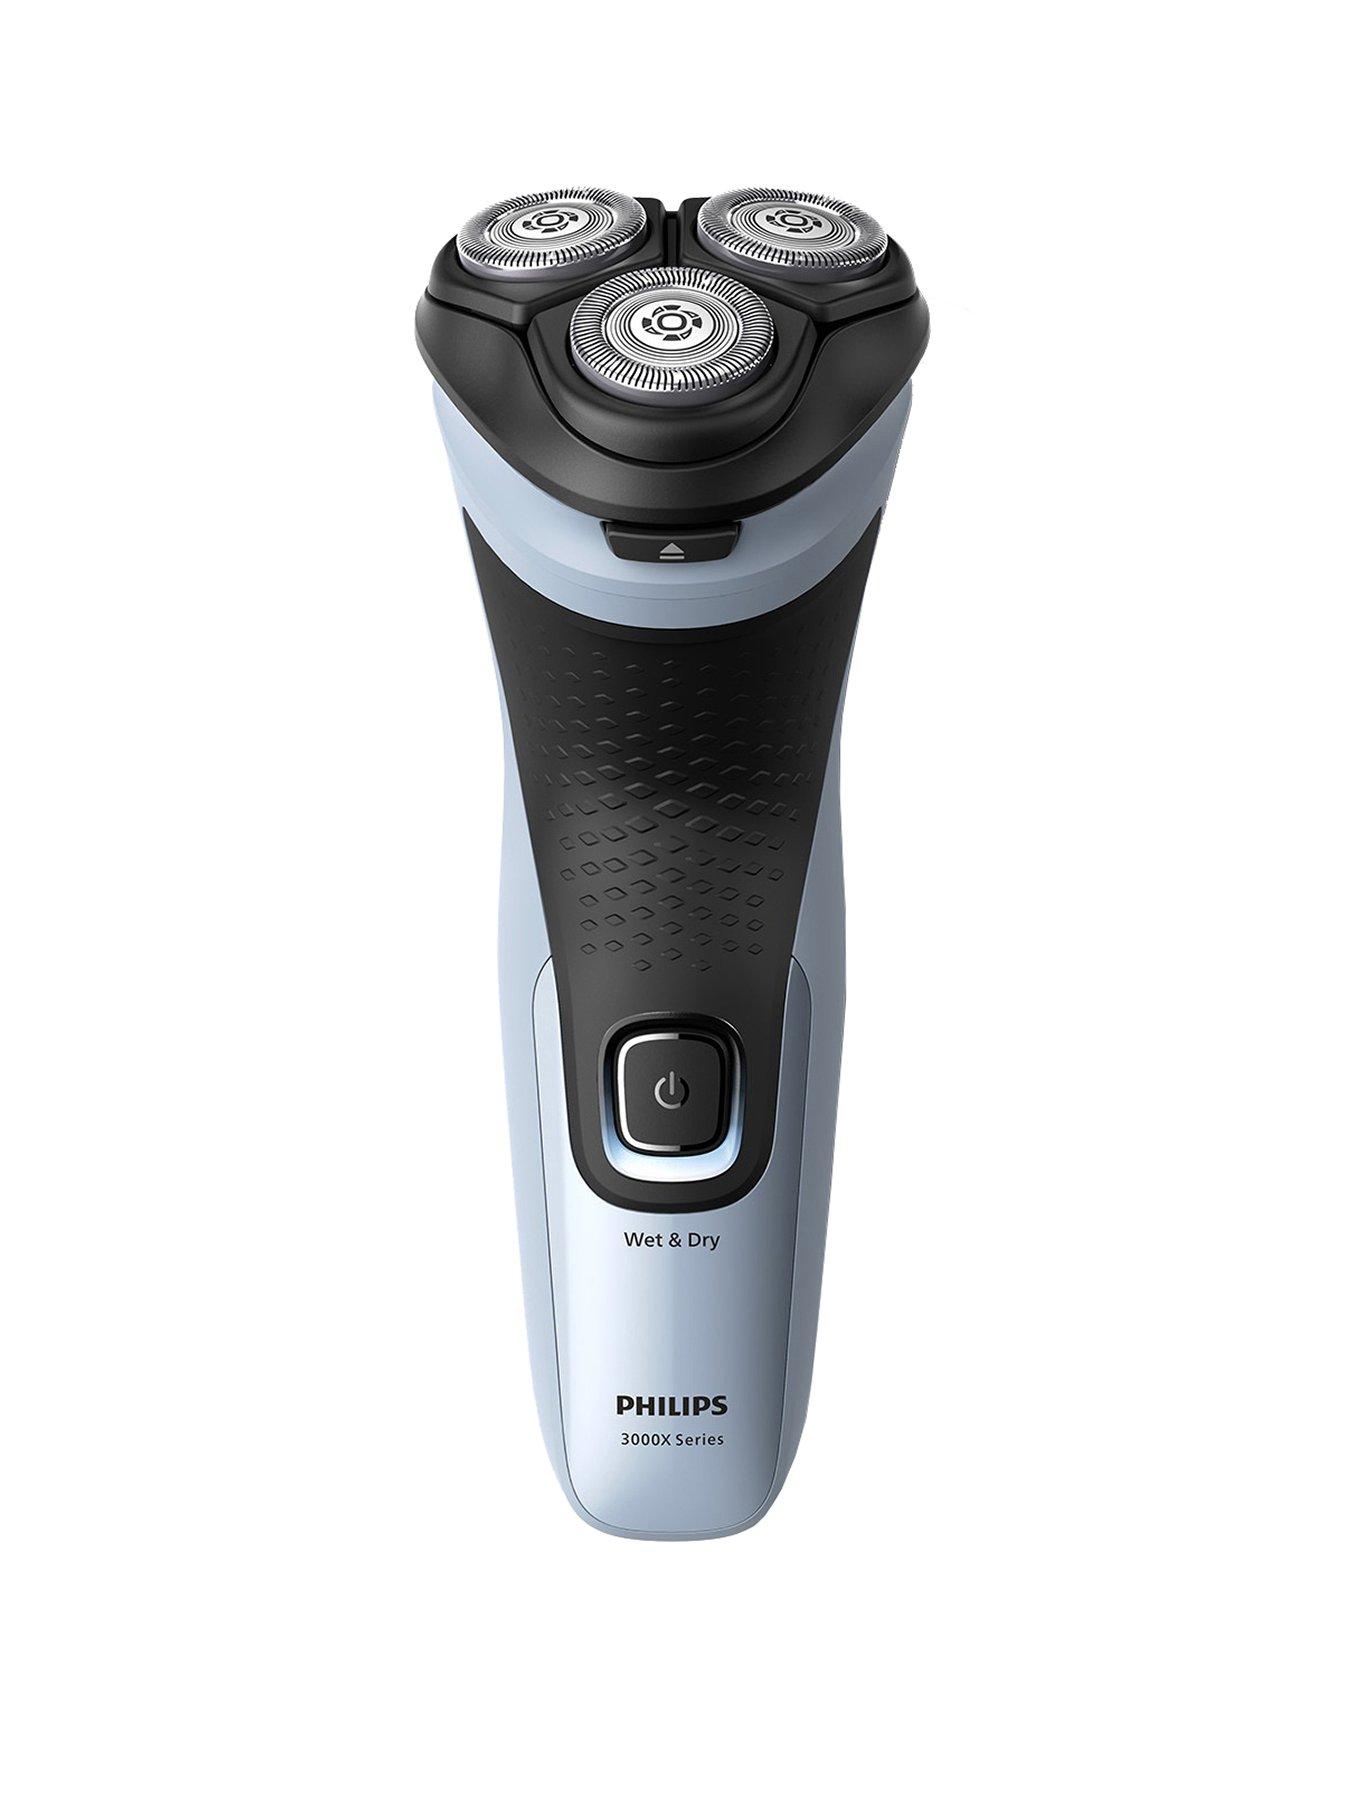 Philips Series 3000X Shaver - Wet and Dry